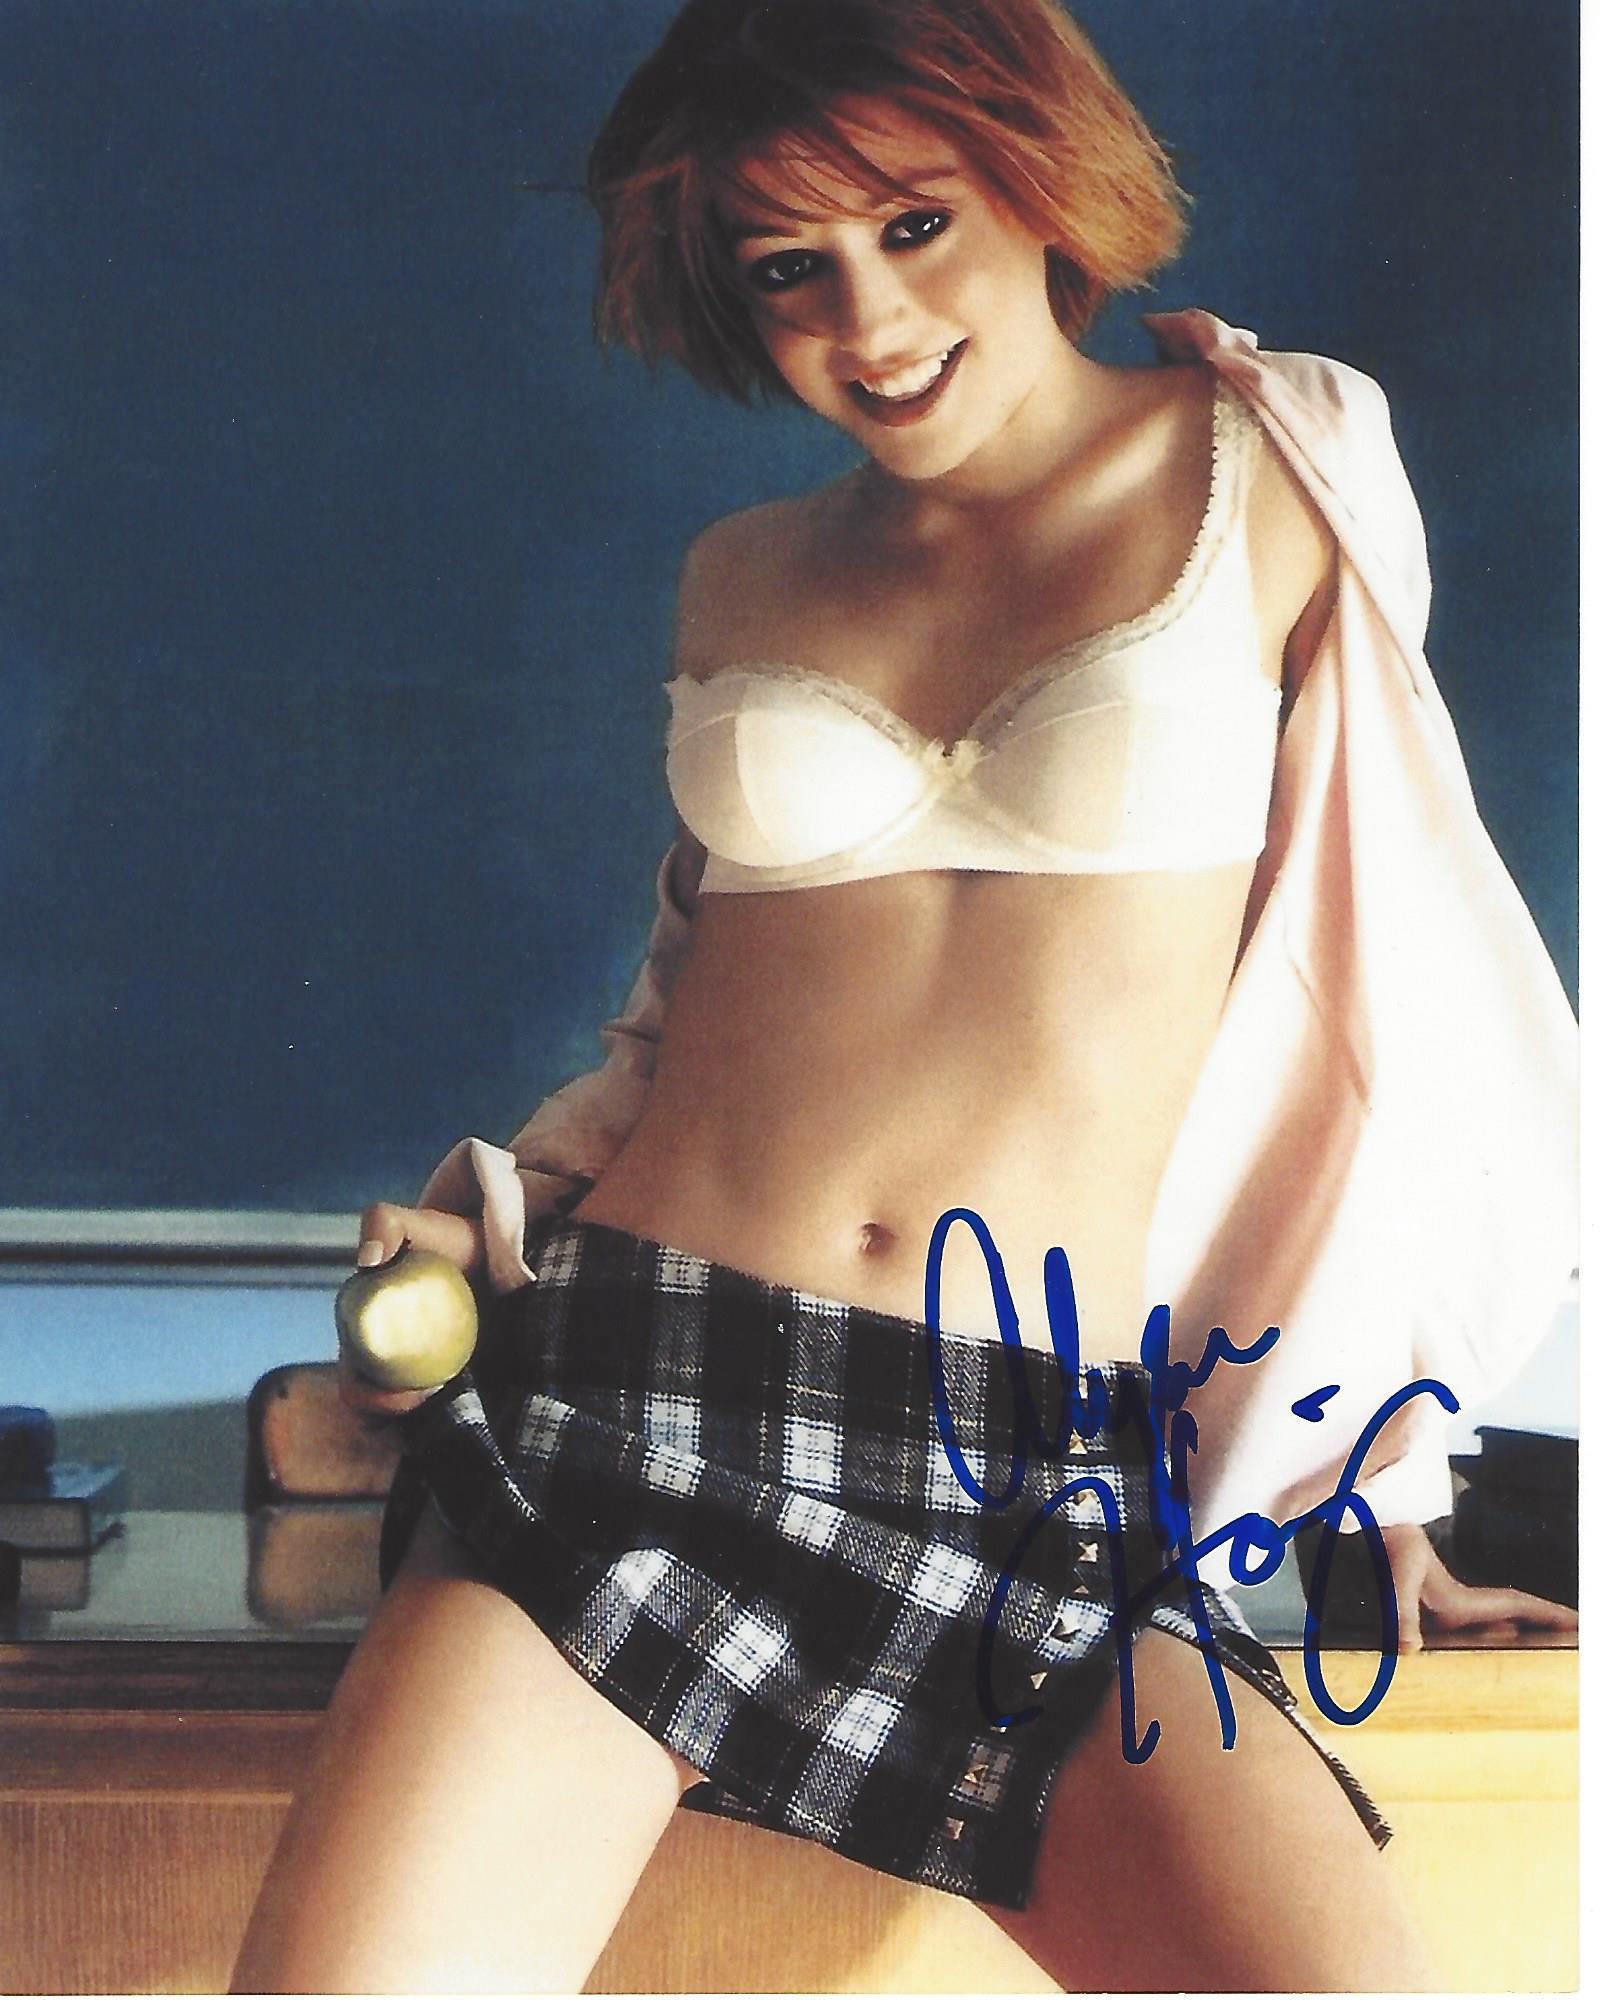 Alyson Hannigan Best Known For Her Roles As Willow Rosenberg On Tv